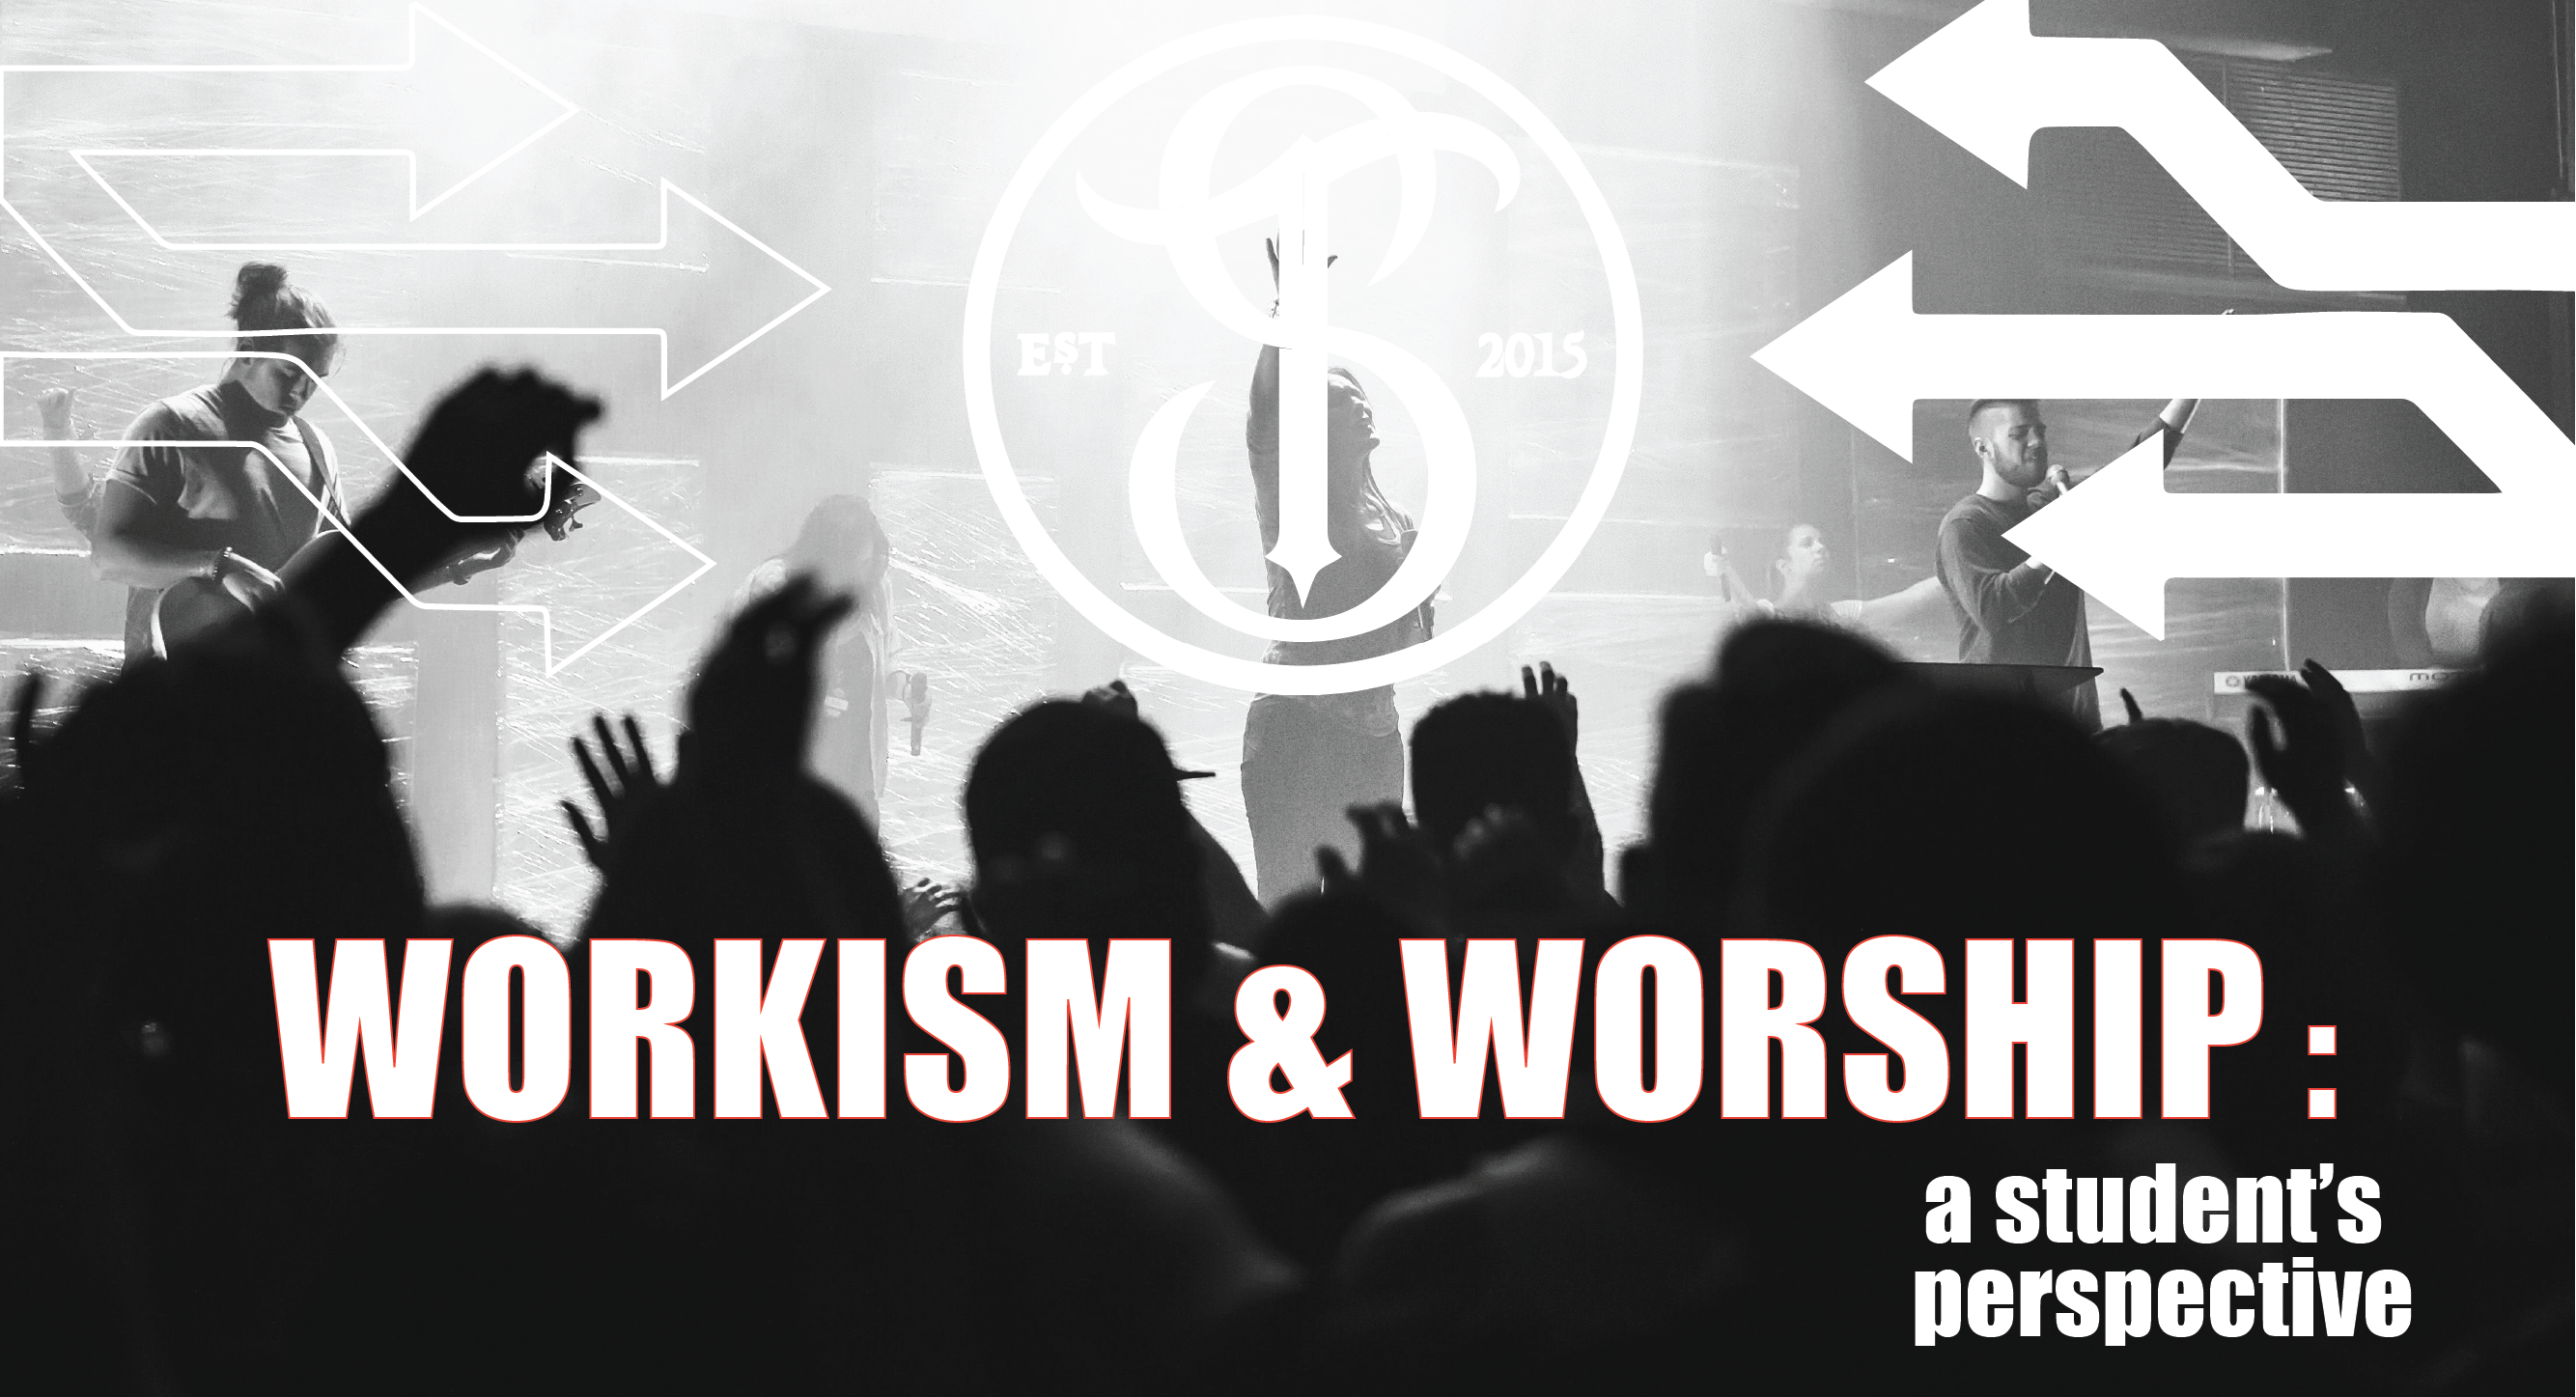 Workism and Worship: A Student’s Perspective